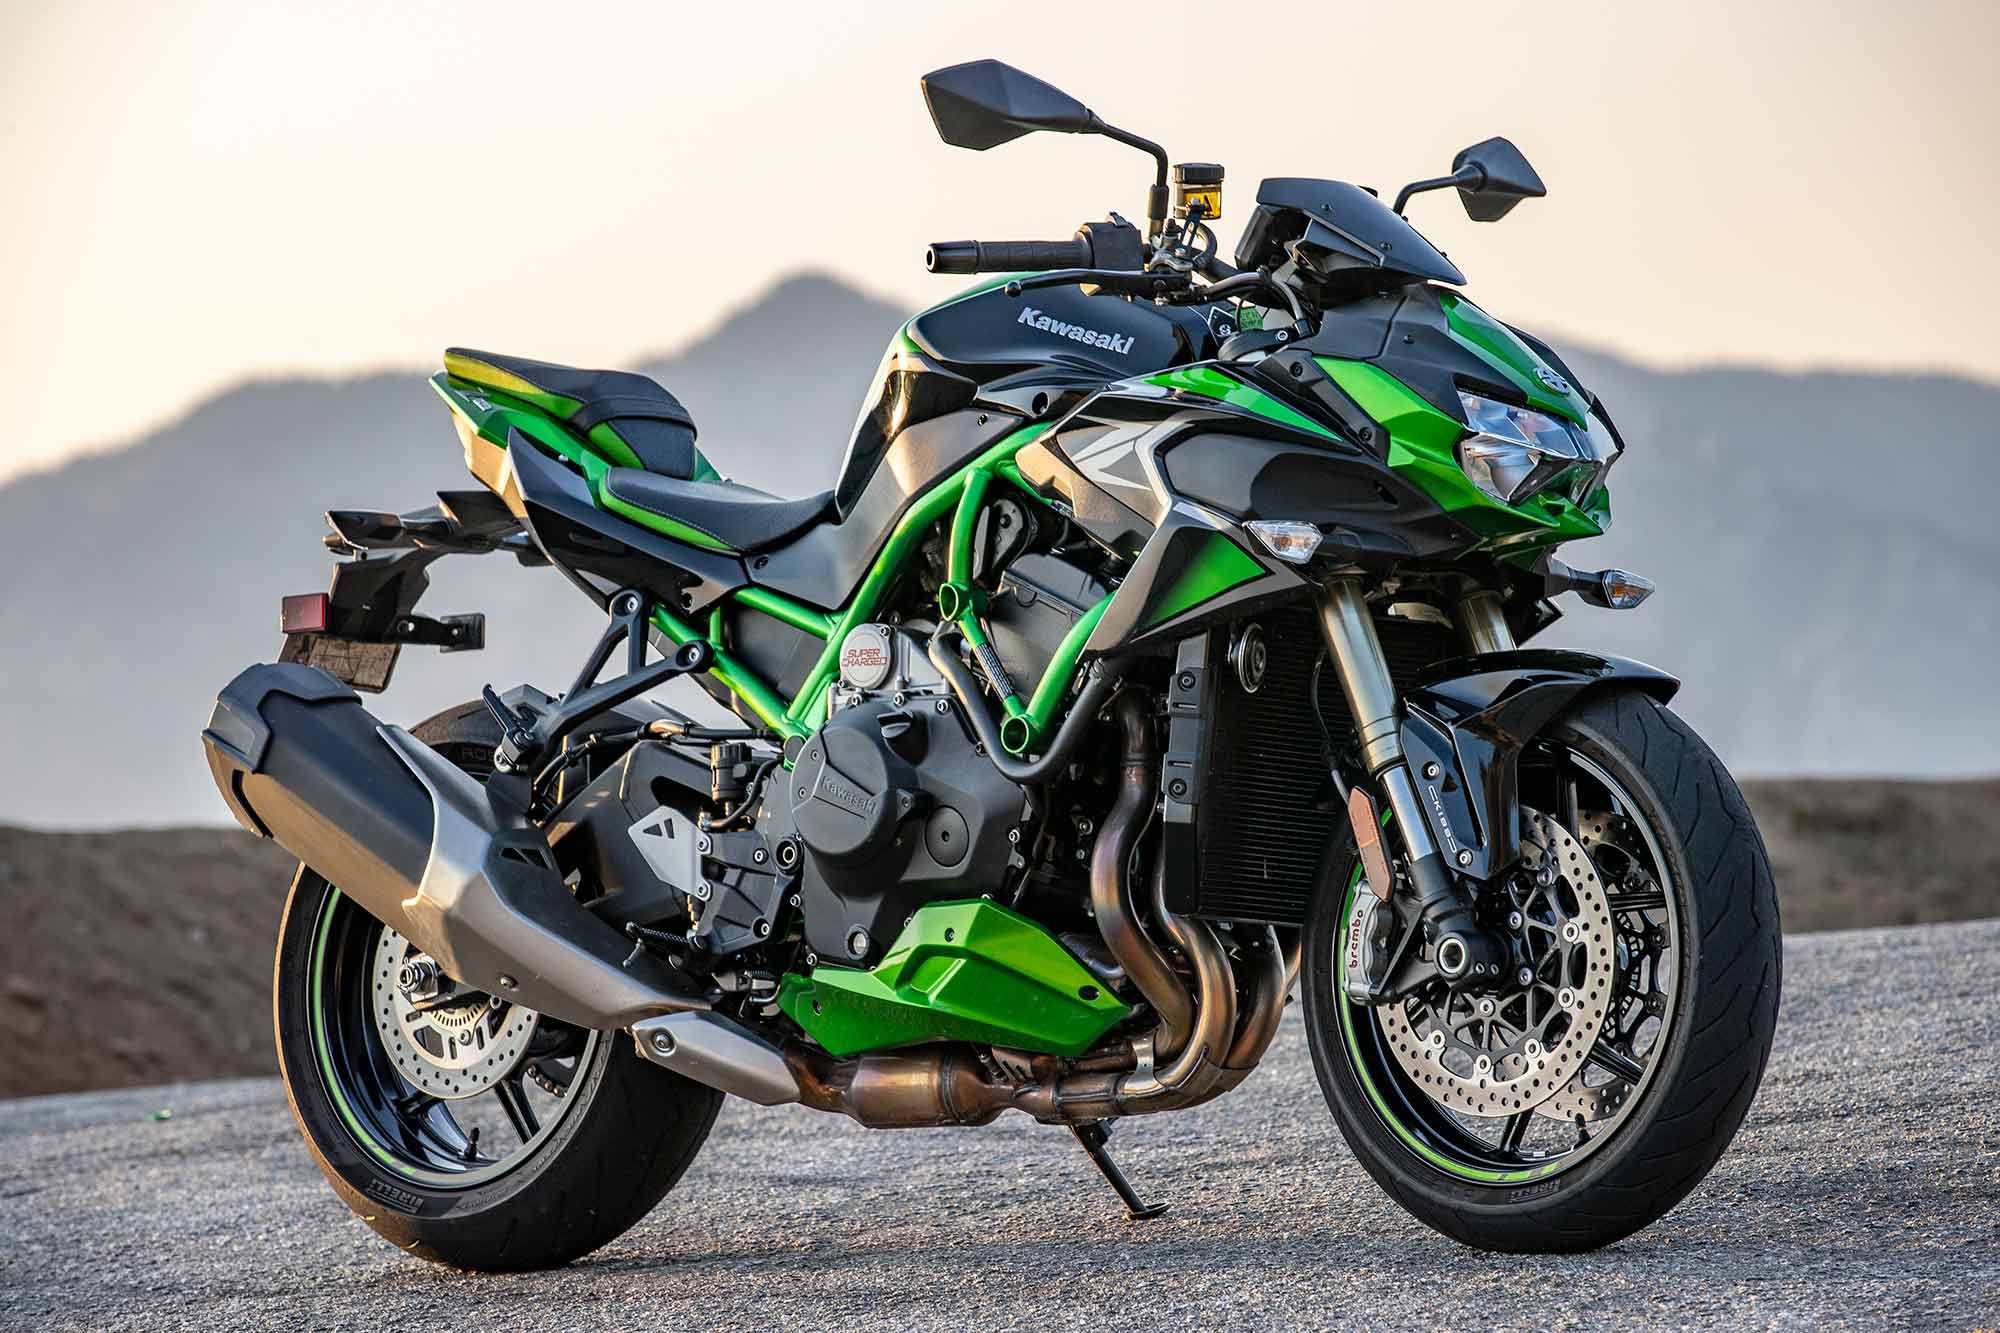 2022 Kawasaki Z H2 specs, features, models, and price